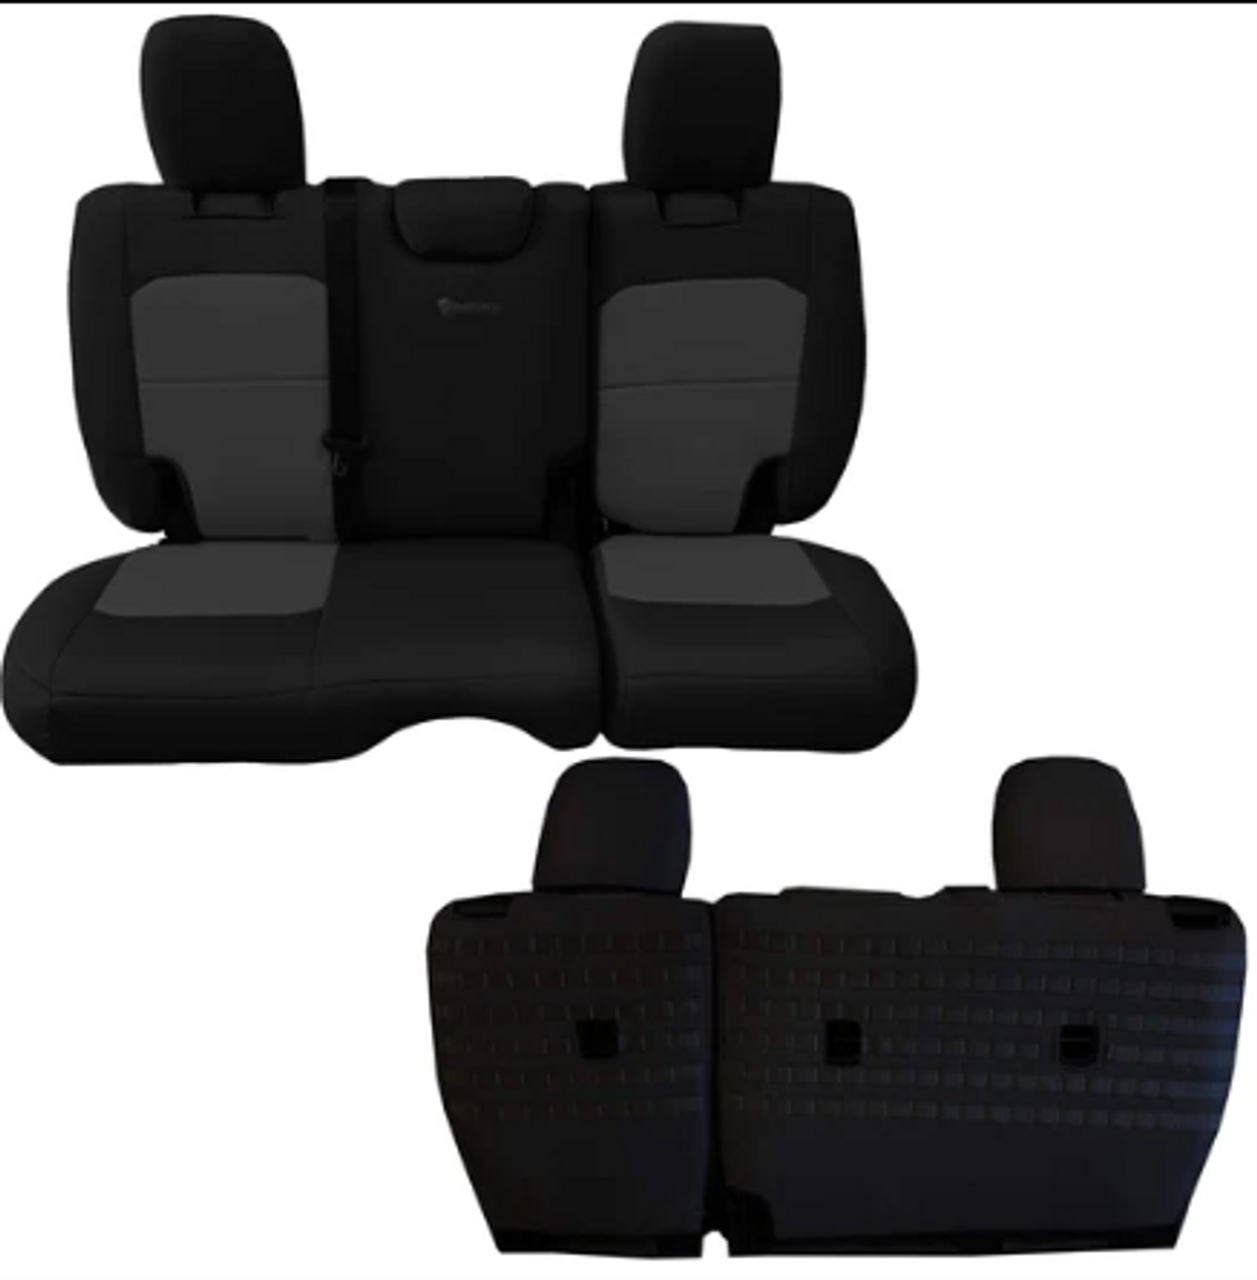 Bartact Tactical Rear Bench Seat Cover with No Arm Rest for Jeep Wrangler JL 4 Door 2018+